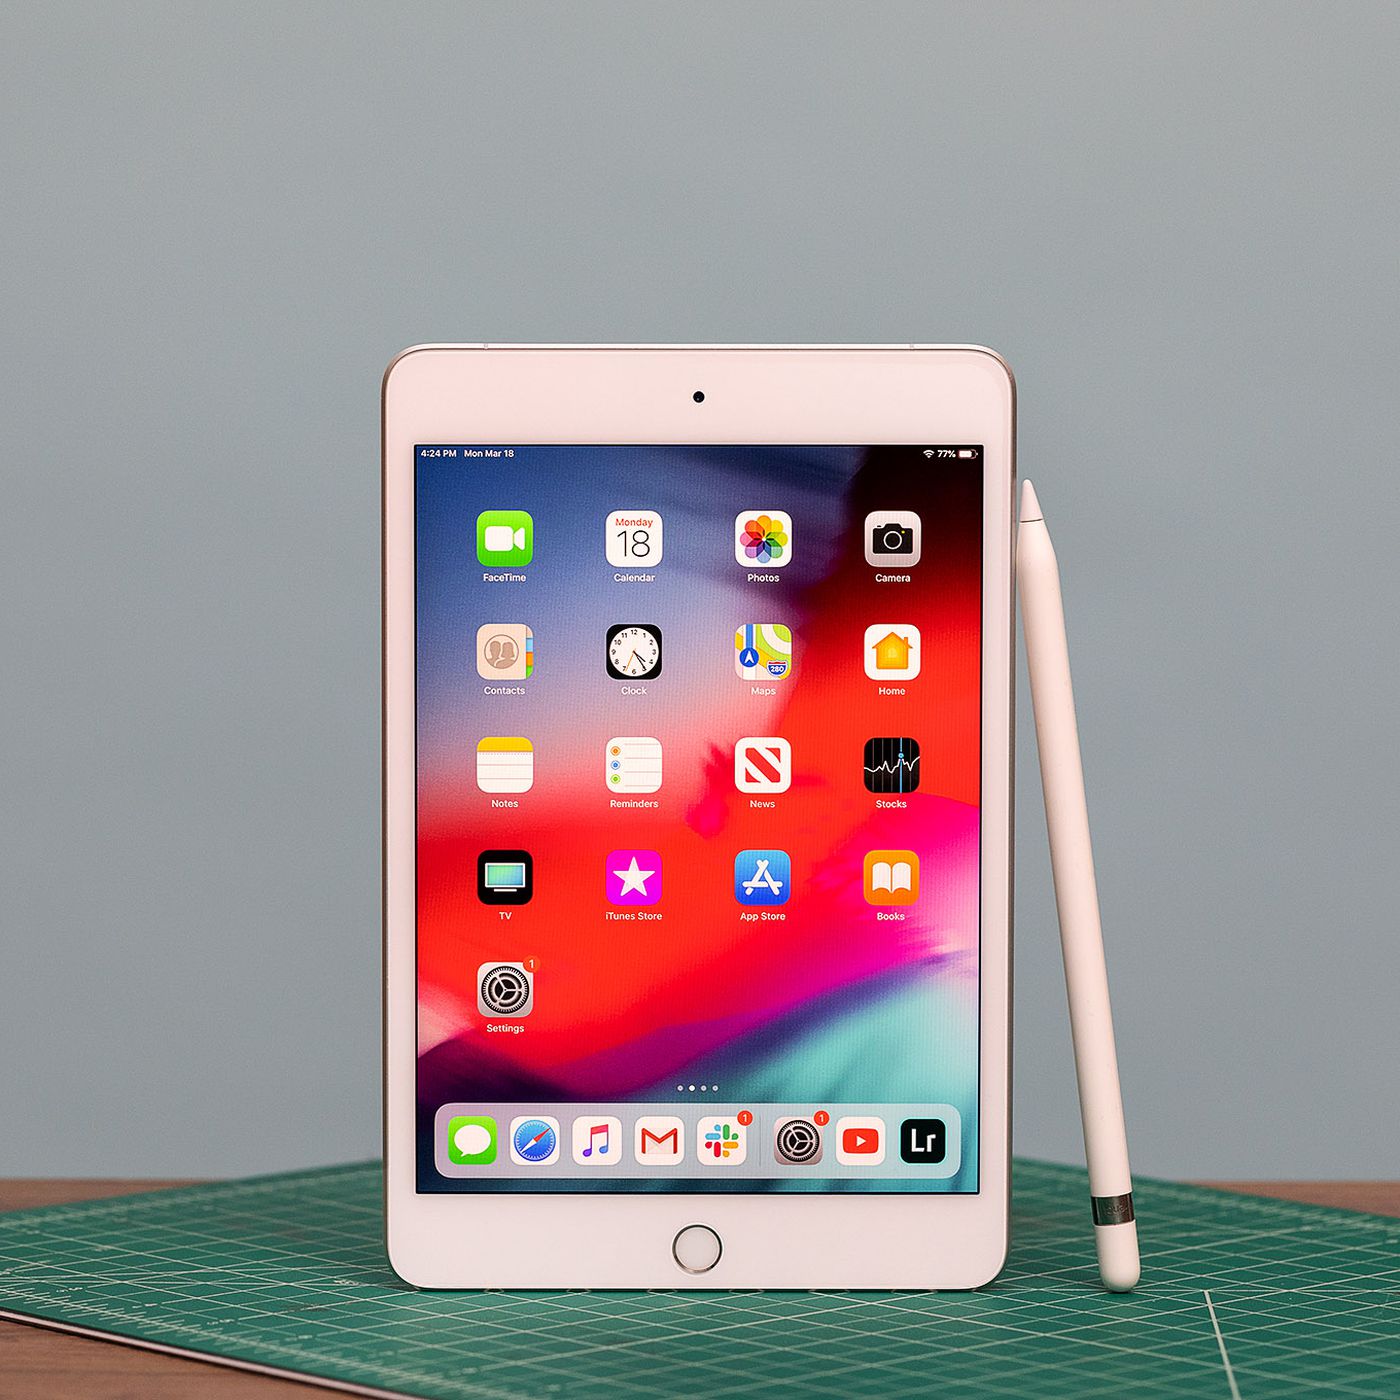 Redesigned iPad Mini reportedly on track to launch this fall - The Verge